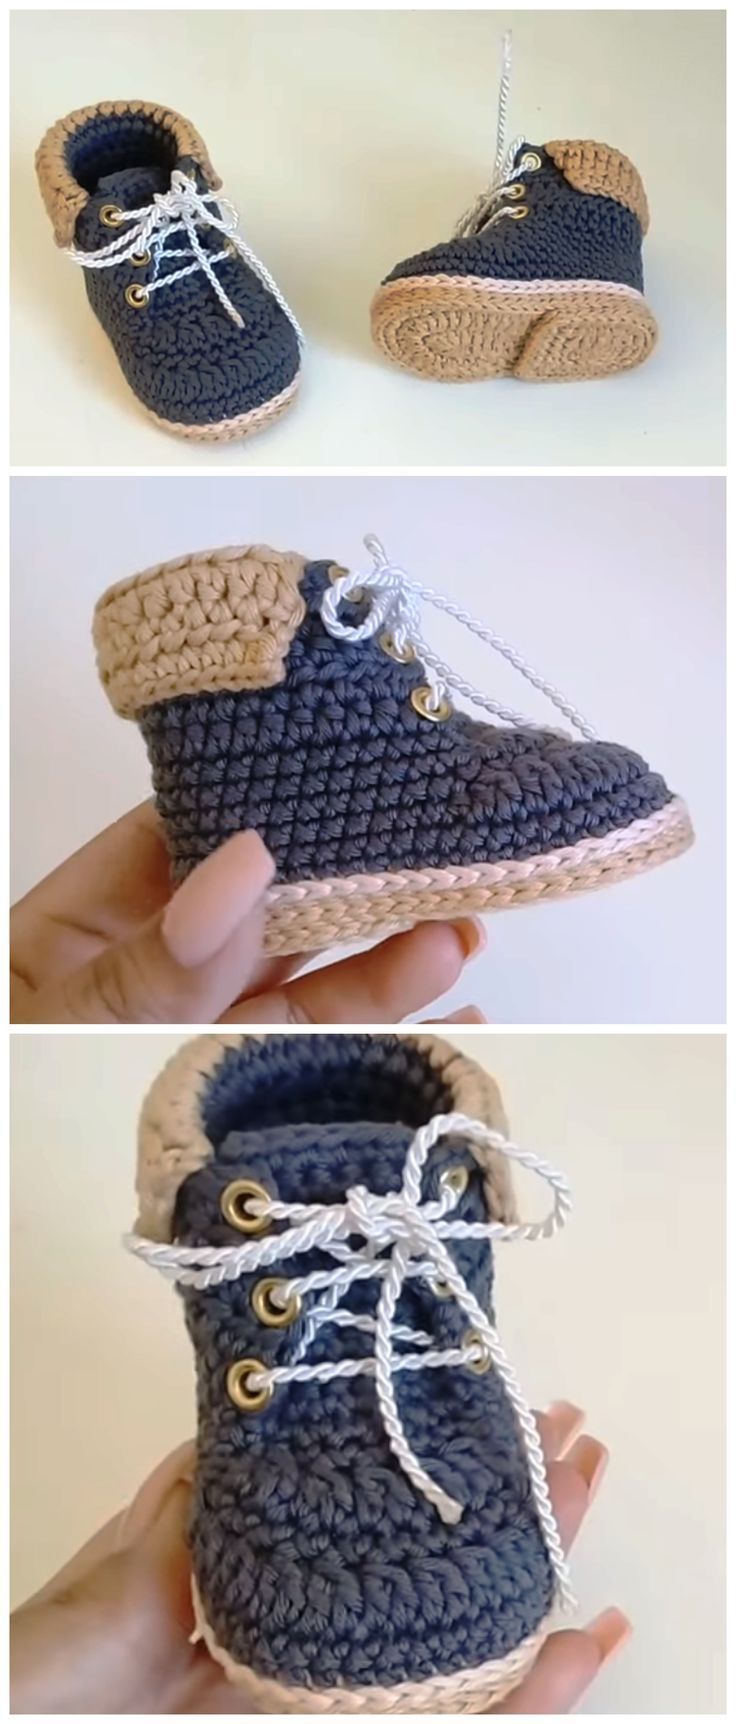 Crochet Baby Boots From 0 To 3 Months - Life with Alyda